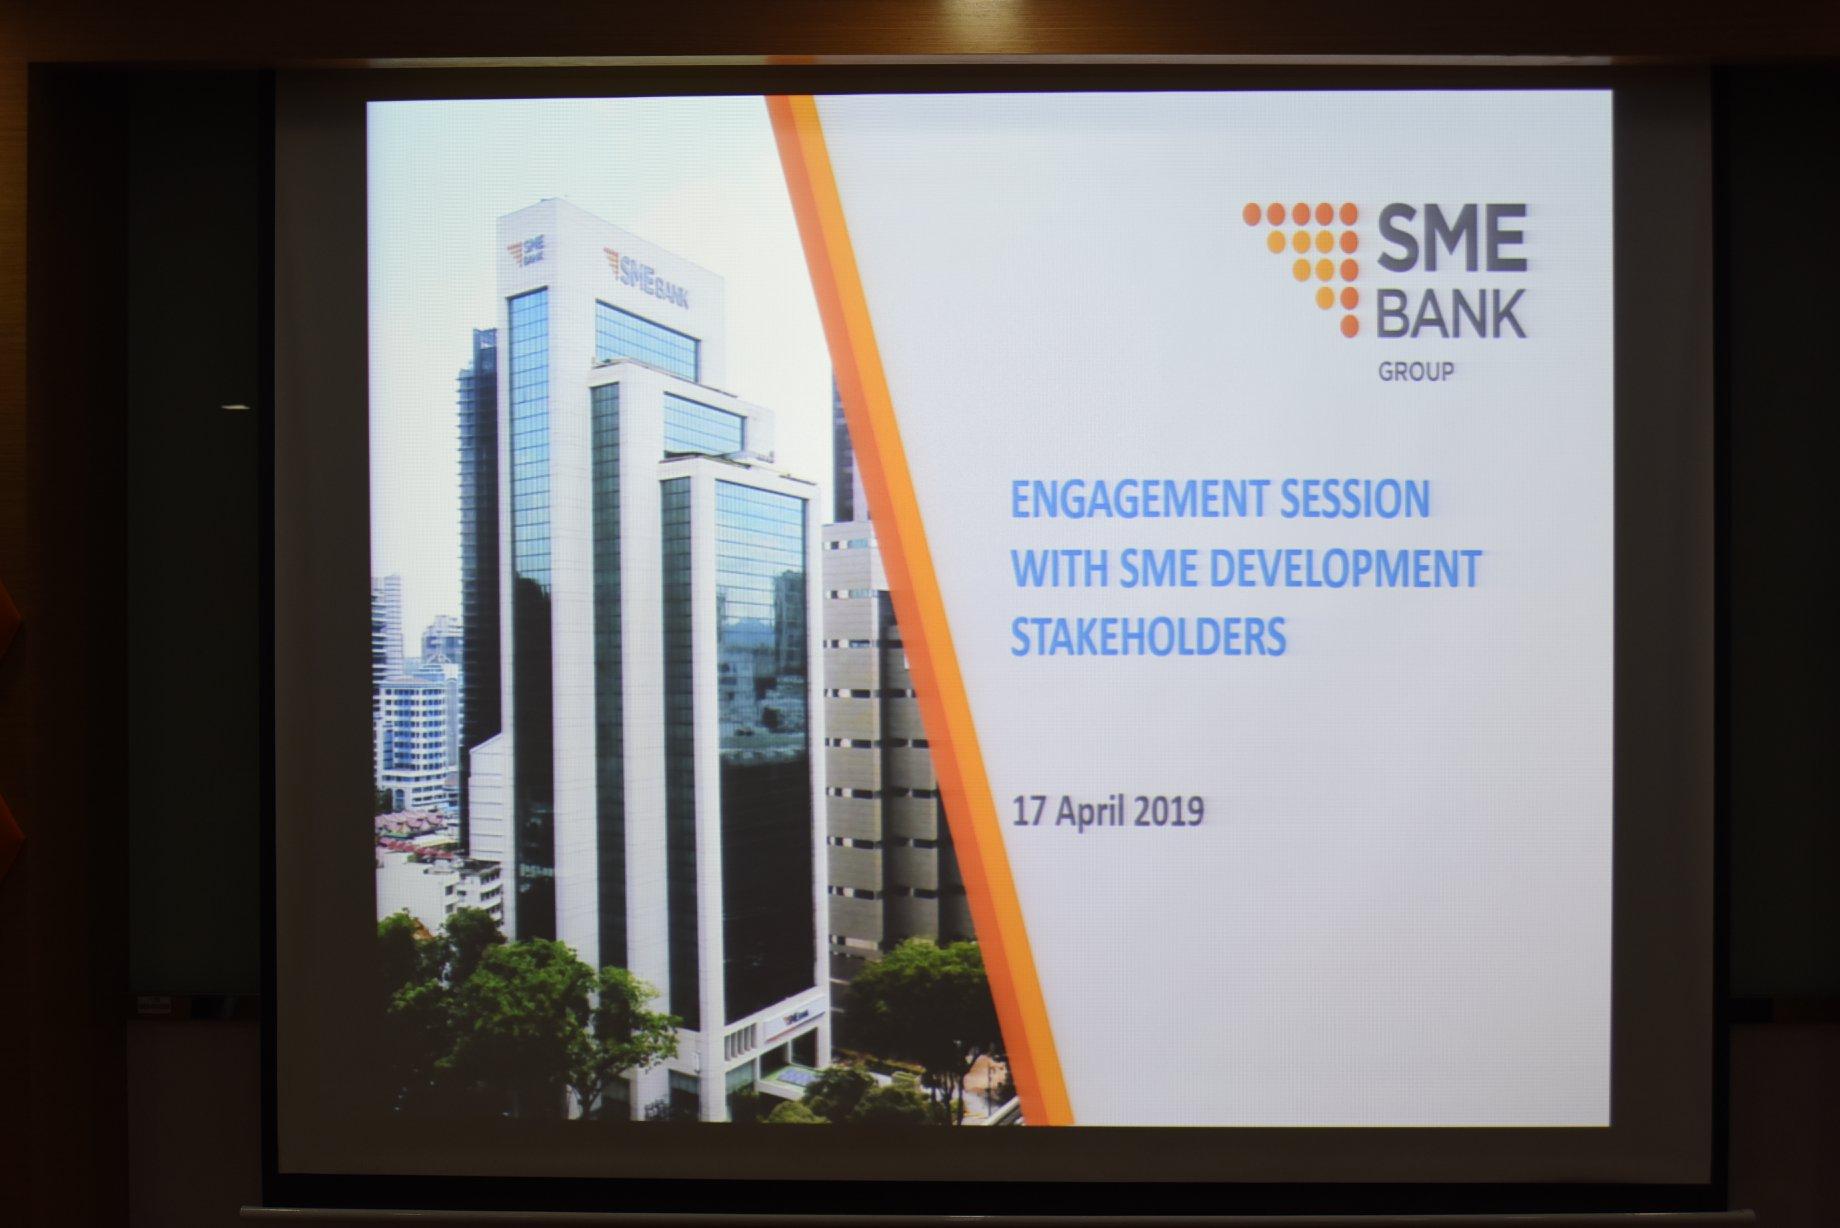 Engagement Session with Non-Bank FIs and SME-Related Development Organizations